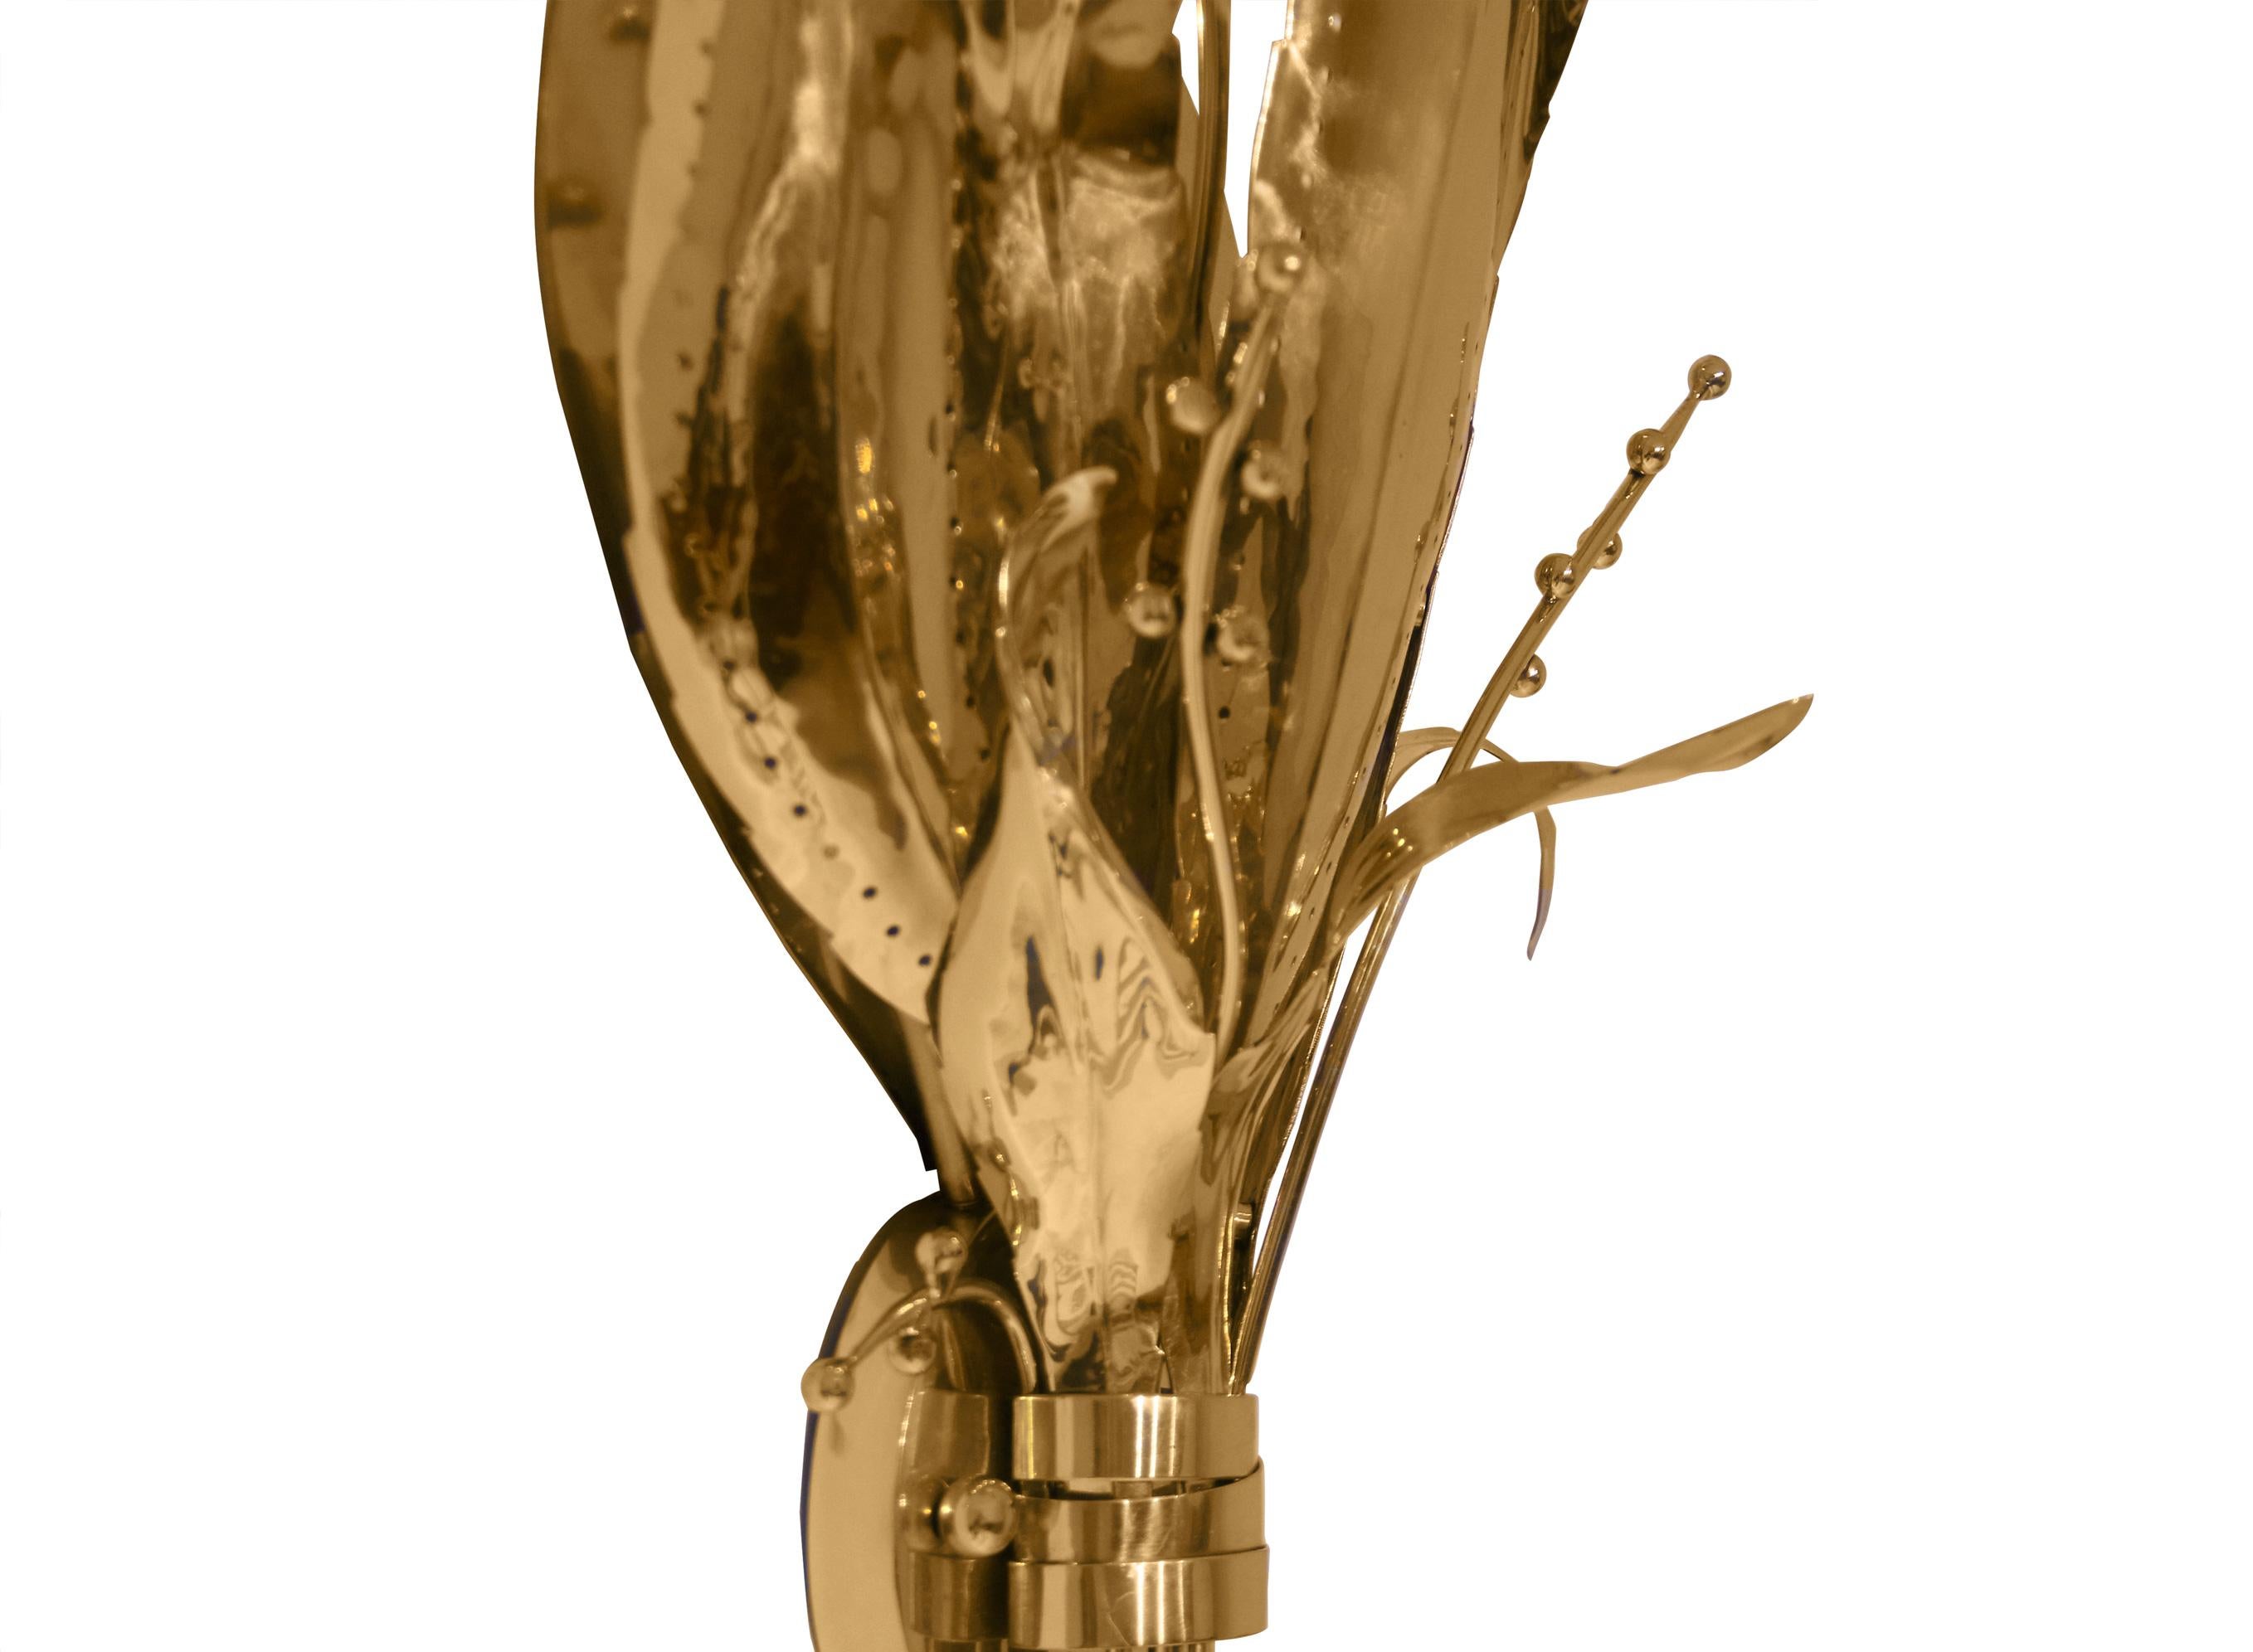 The intricate petals and stems of the Botanica sconce create a whimsical seduction reminiscent of an enchanted fairytale.

Structure: Polished brass with high gloss finish

Koket products are unique one of a kind handcrafted pieces, each item has